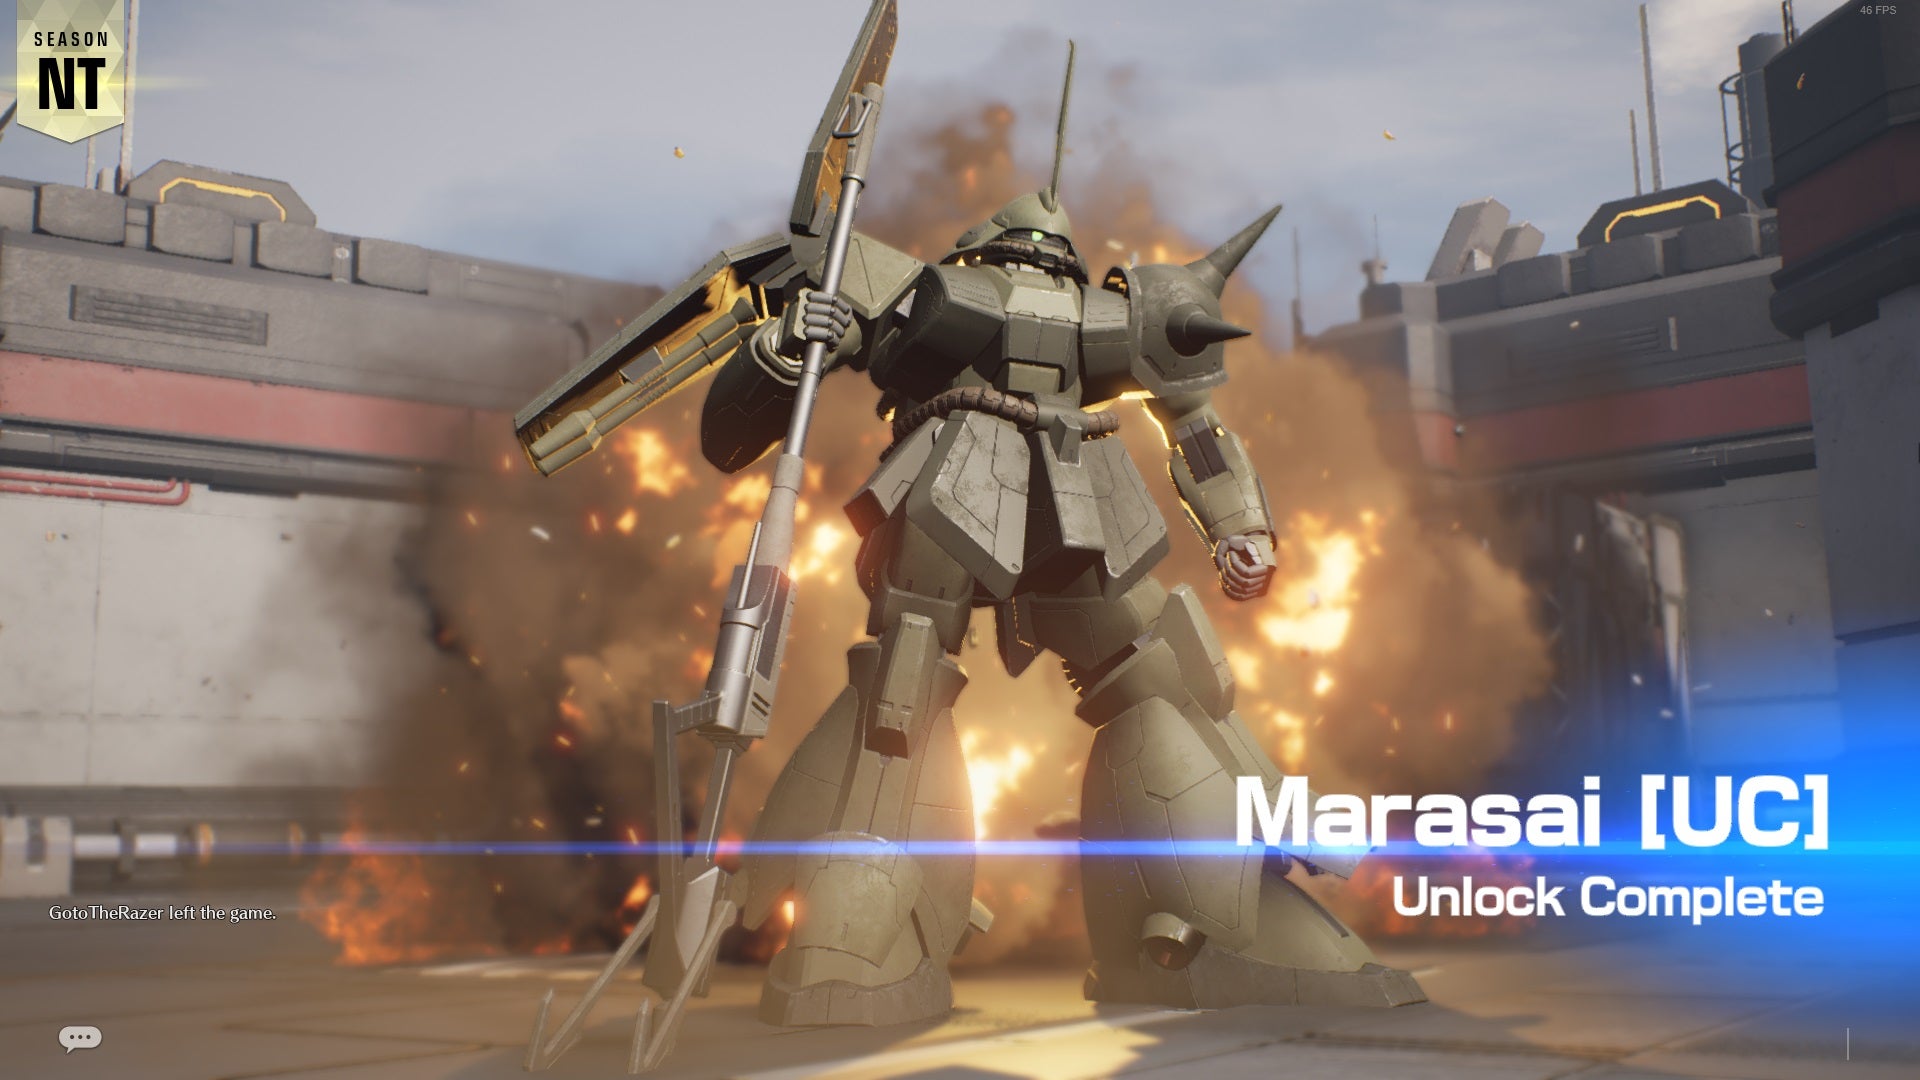 The unlock screen for the Marrusai Gundam in GUndam Evolution. COol mech with an explosion behind it.